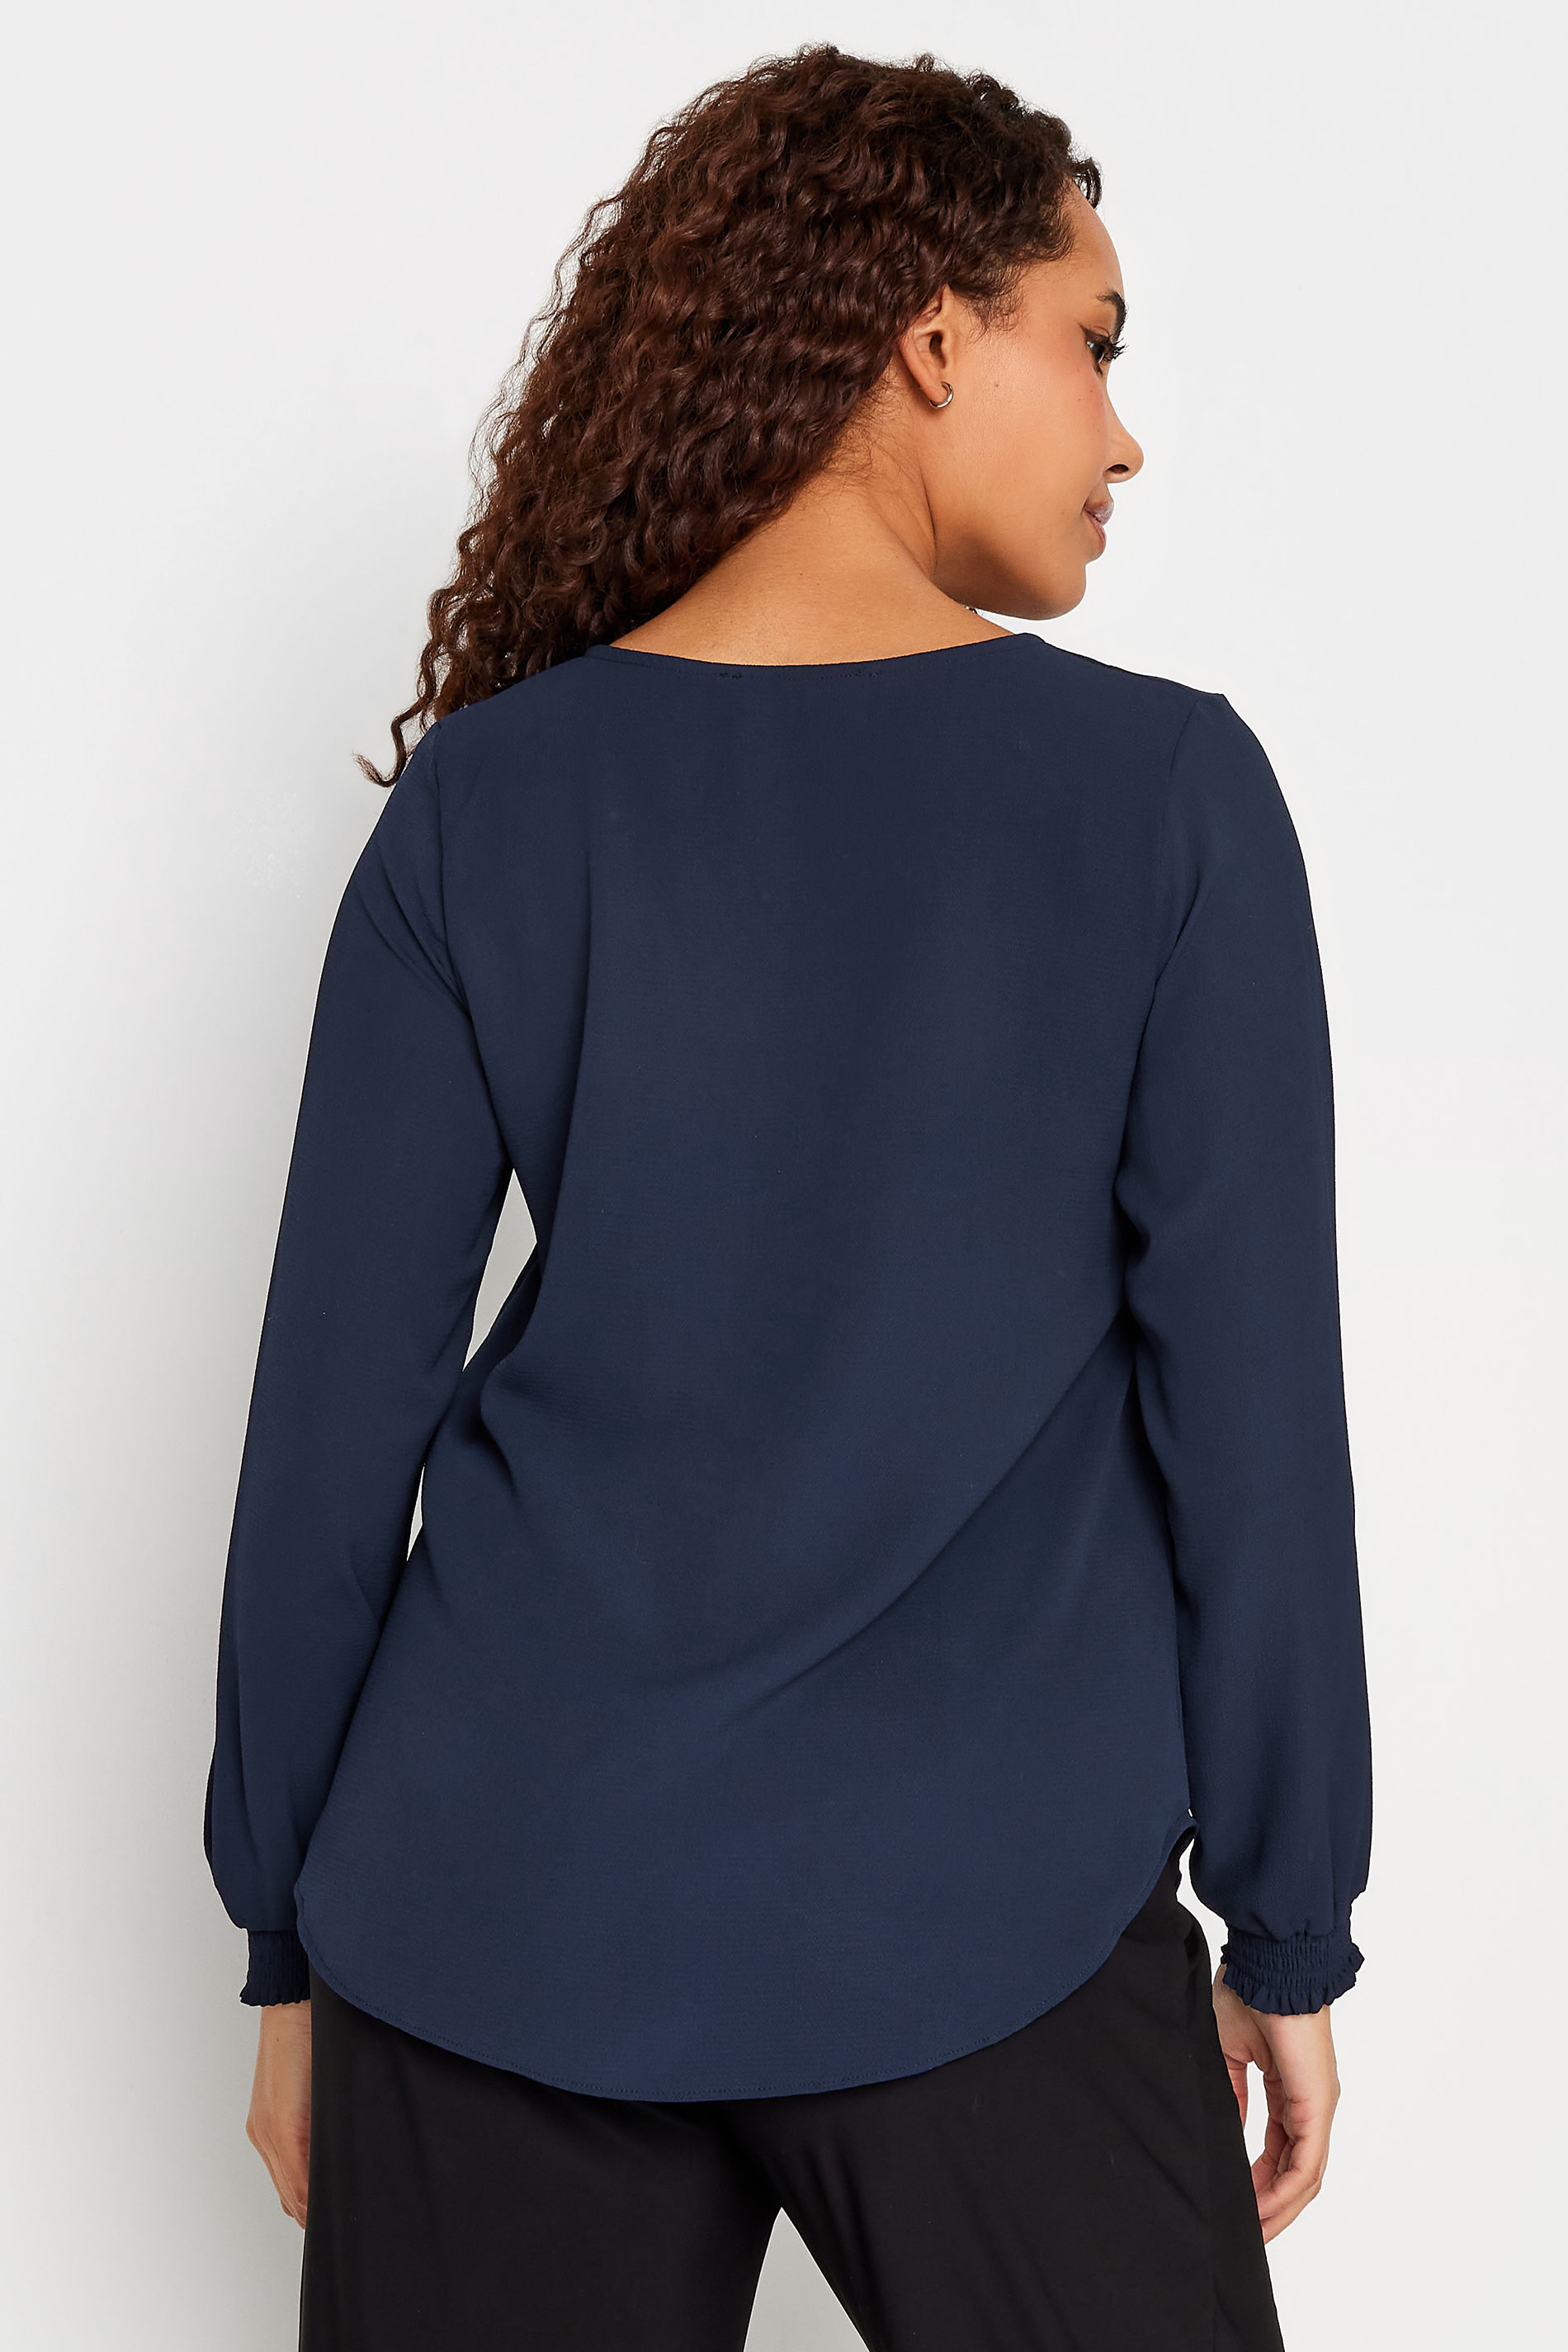 M&Co Navy Blue Shirred Cuff Blouse | M&Co 3